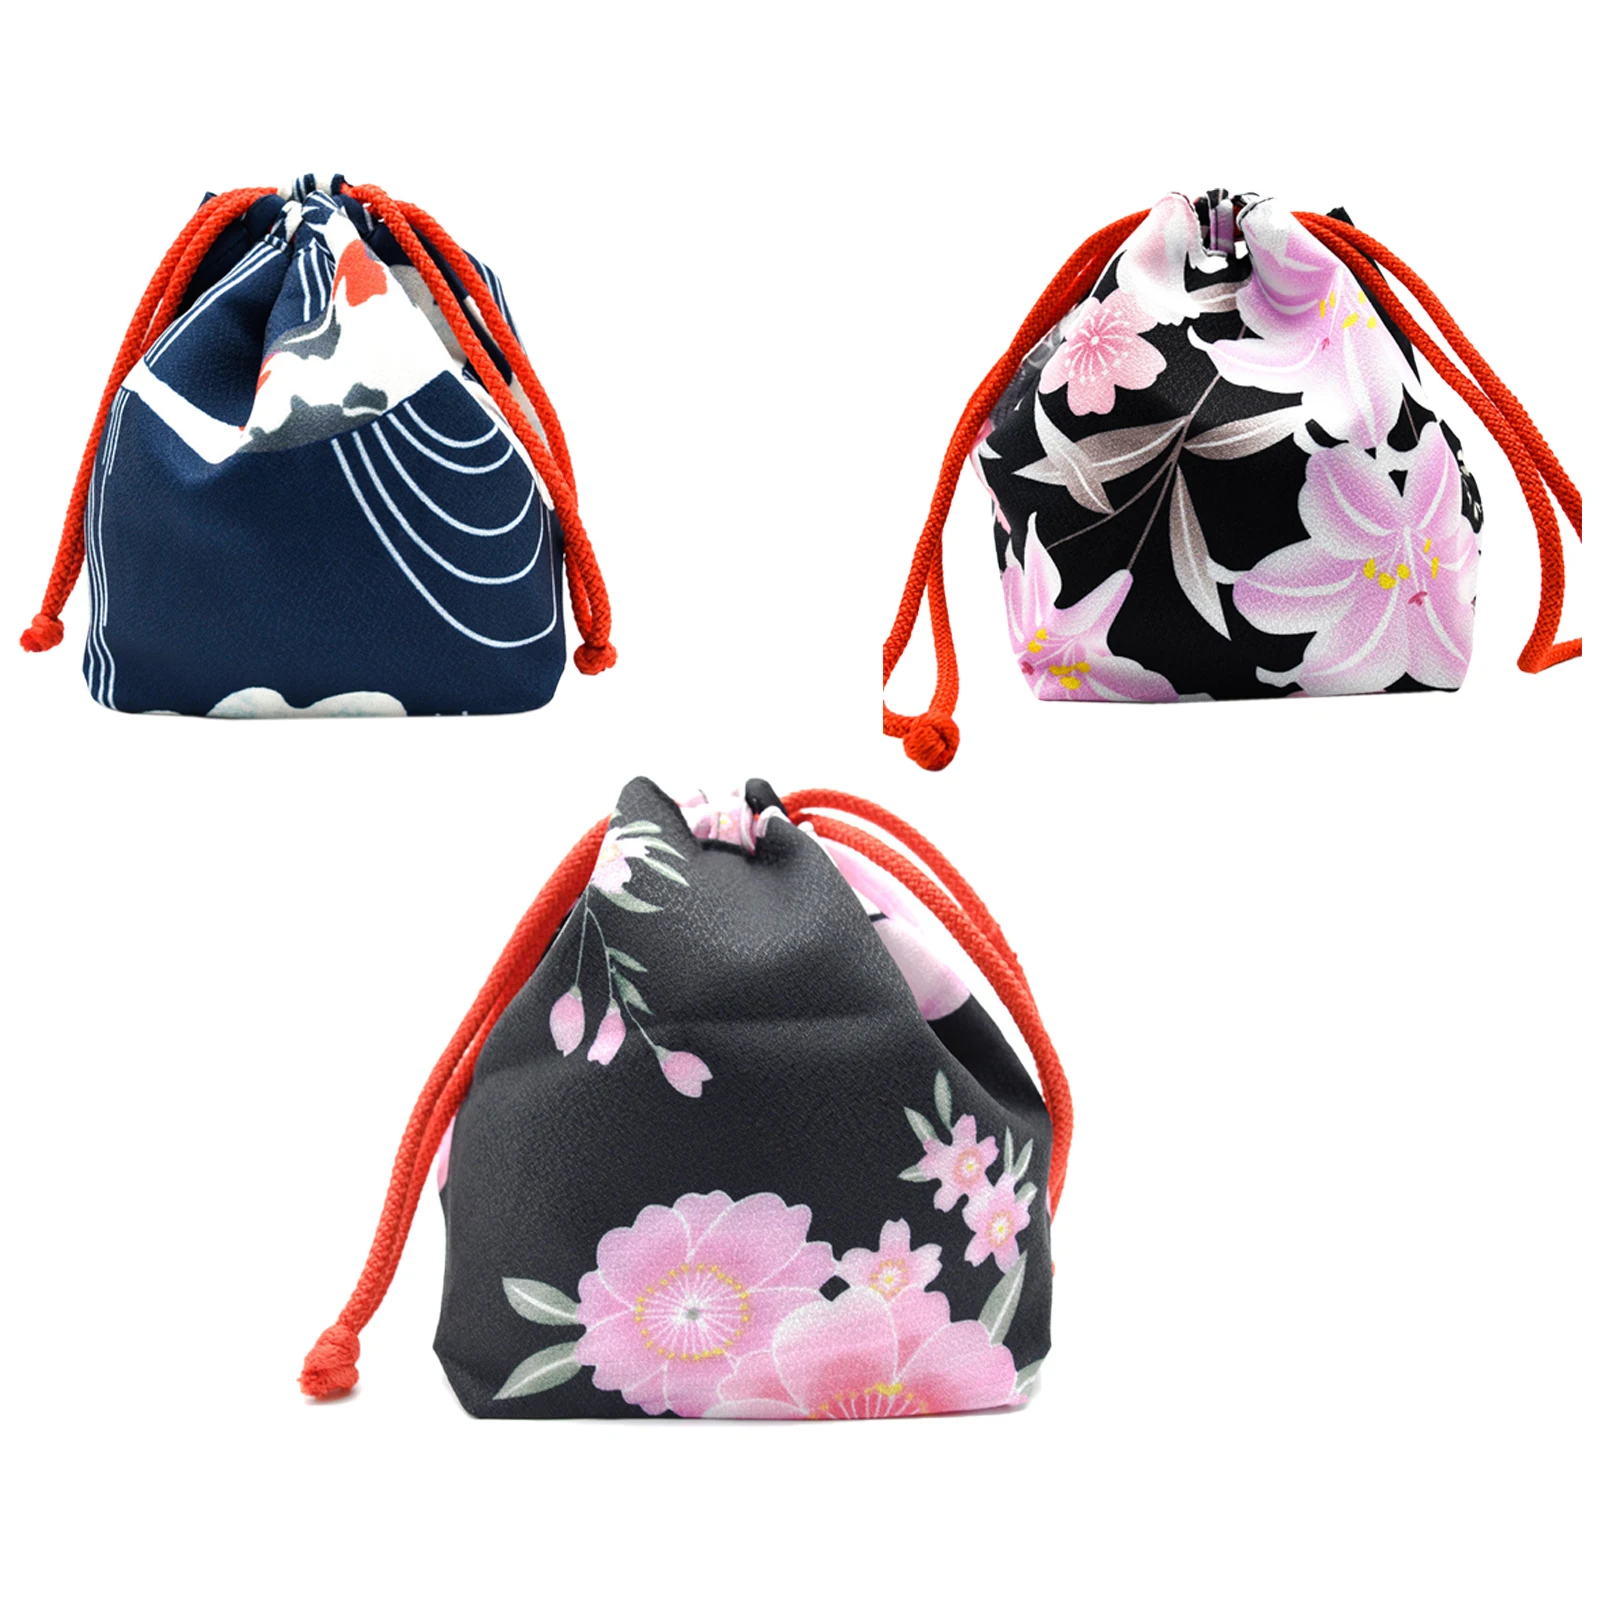 Japanese Drawstring Bag Travel Cosmetic Jewelry Coin Purse Home Office School Lunch Handbag Totes Sundry Phone Pouch Organizer